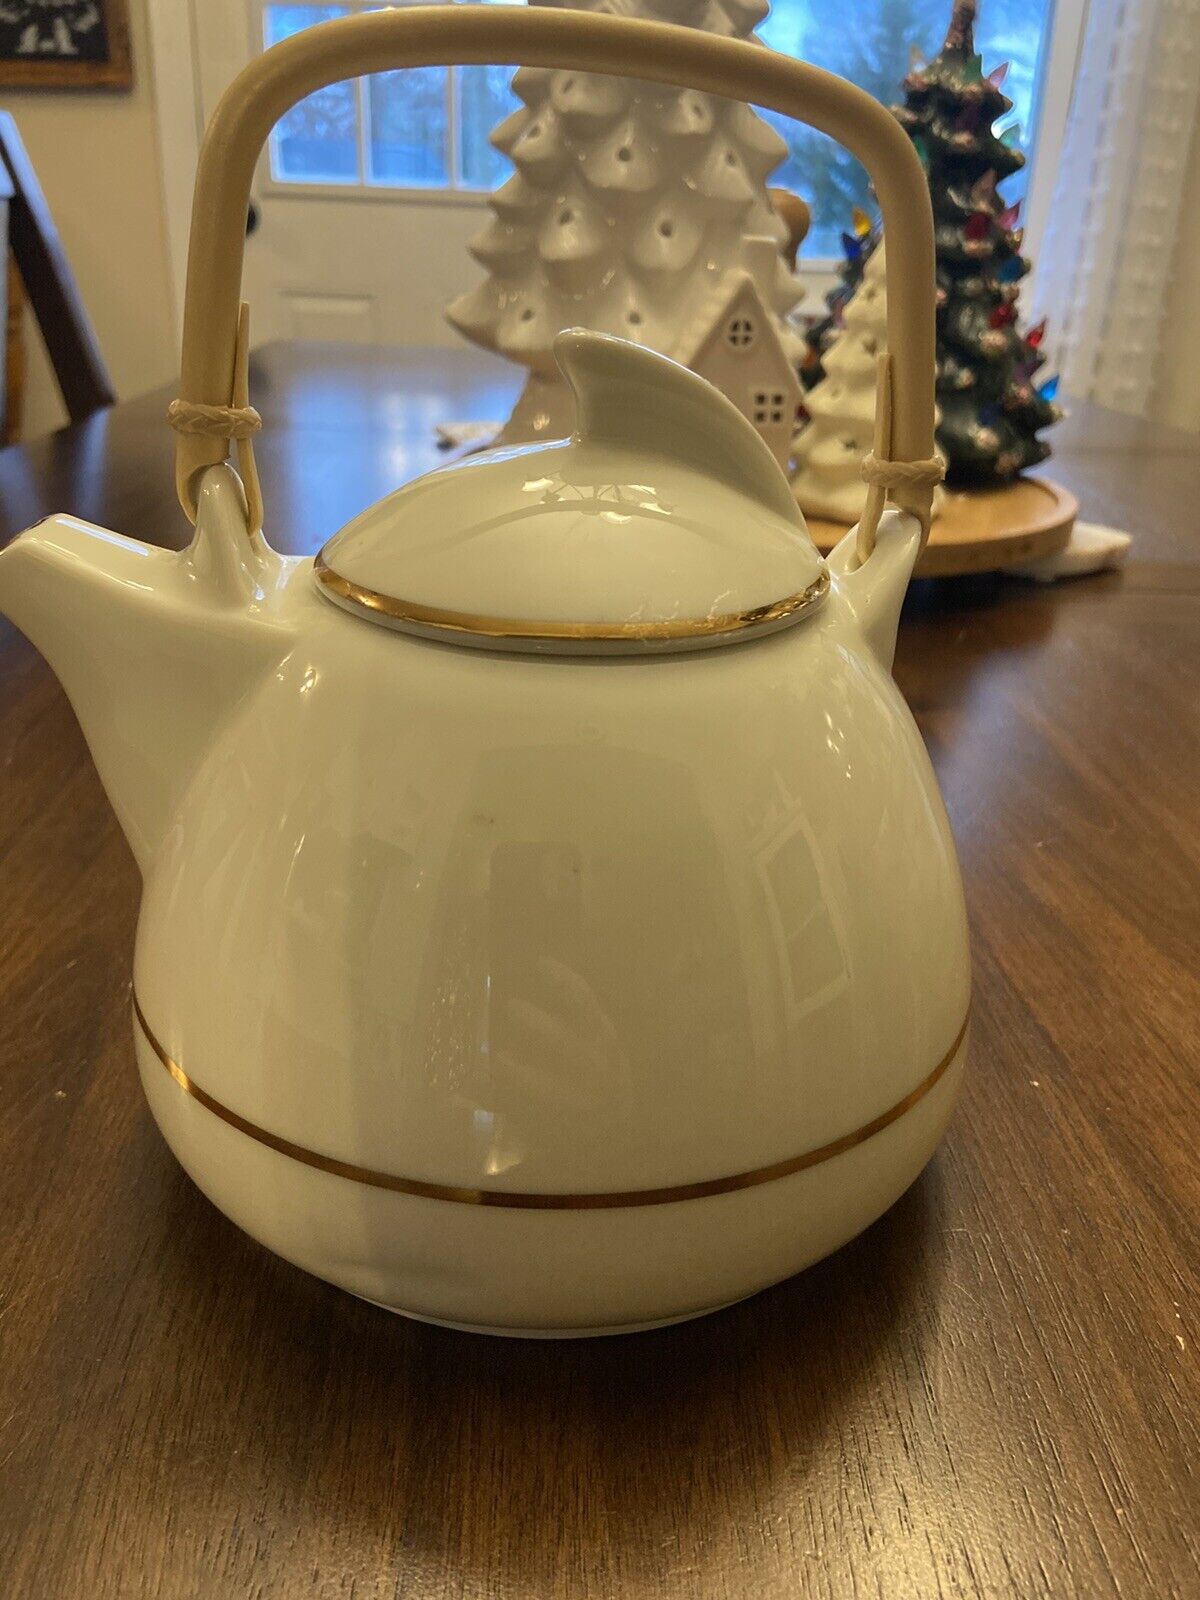 Vintage Robinson Design Group Teapot Japan 1989 Cream With Gold Trim & Bamboo